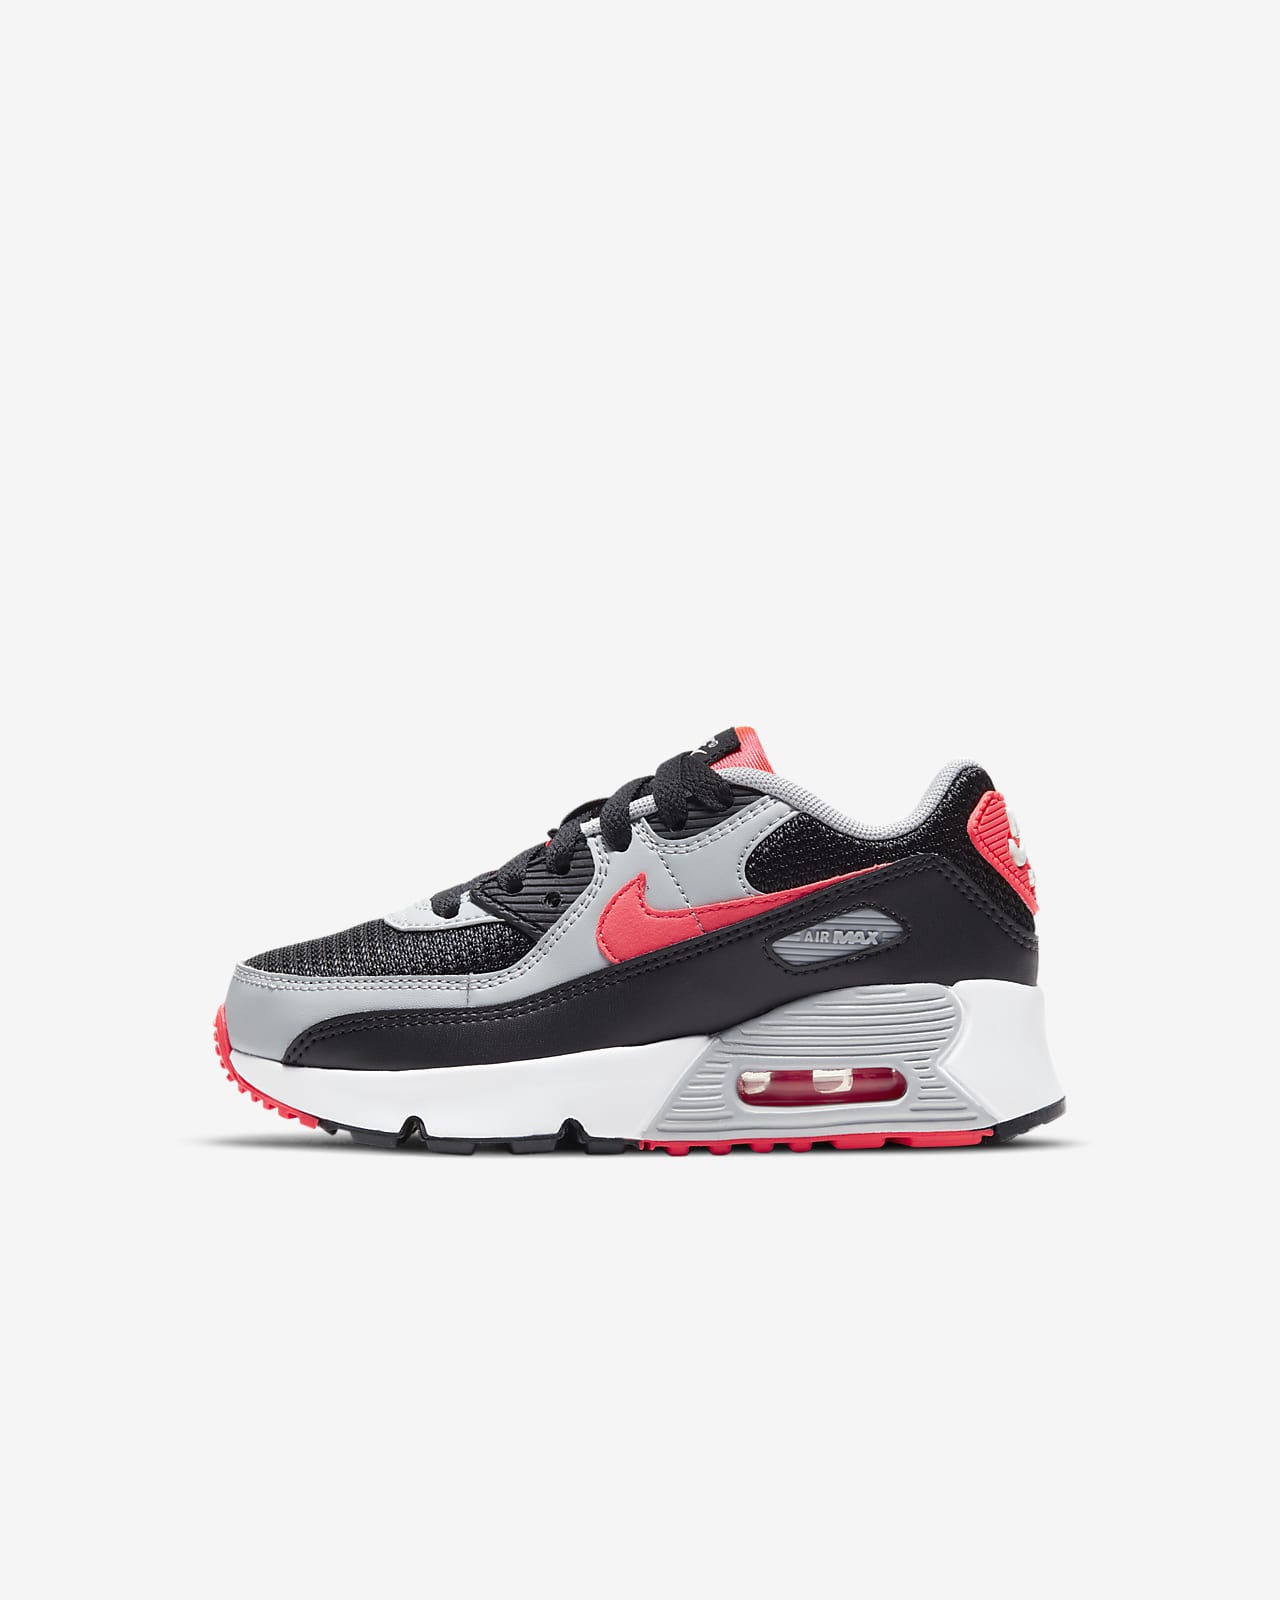 Chaussure Nike Air Max 90 pour Jeune 